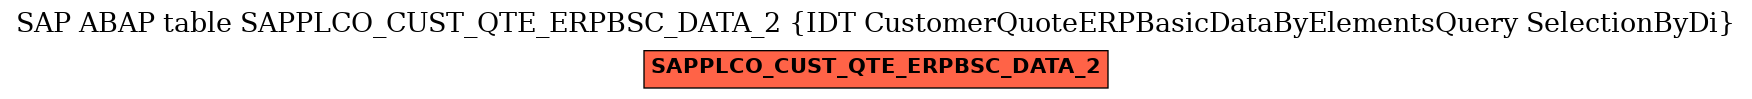 E-R Diagram for table SAPPLCO_CUST_QTE_ERPBSC_DATA_2 (IDT CustomerQuoteERPBasicDataByElementsQuery SelectionByDi)